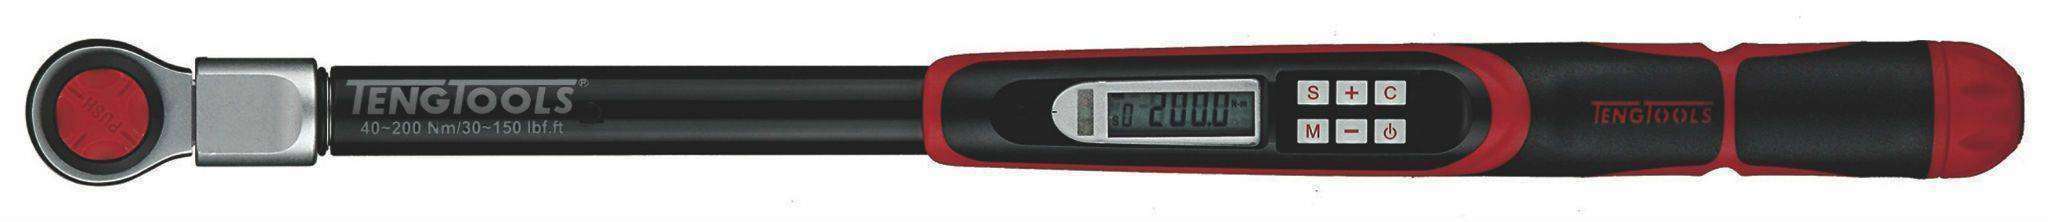 Teng Tools 20-200Nm 1/2 Inch Drive Electronic/Digital Torque Wrench -1292D200